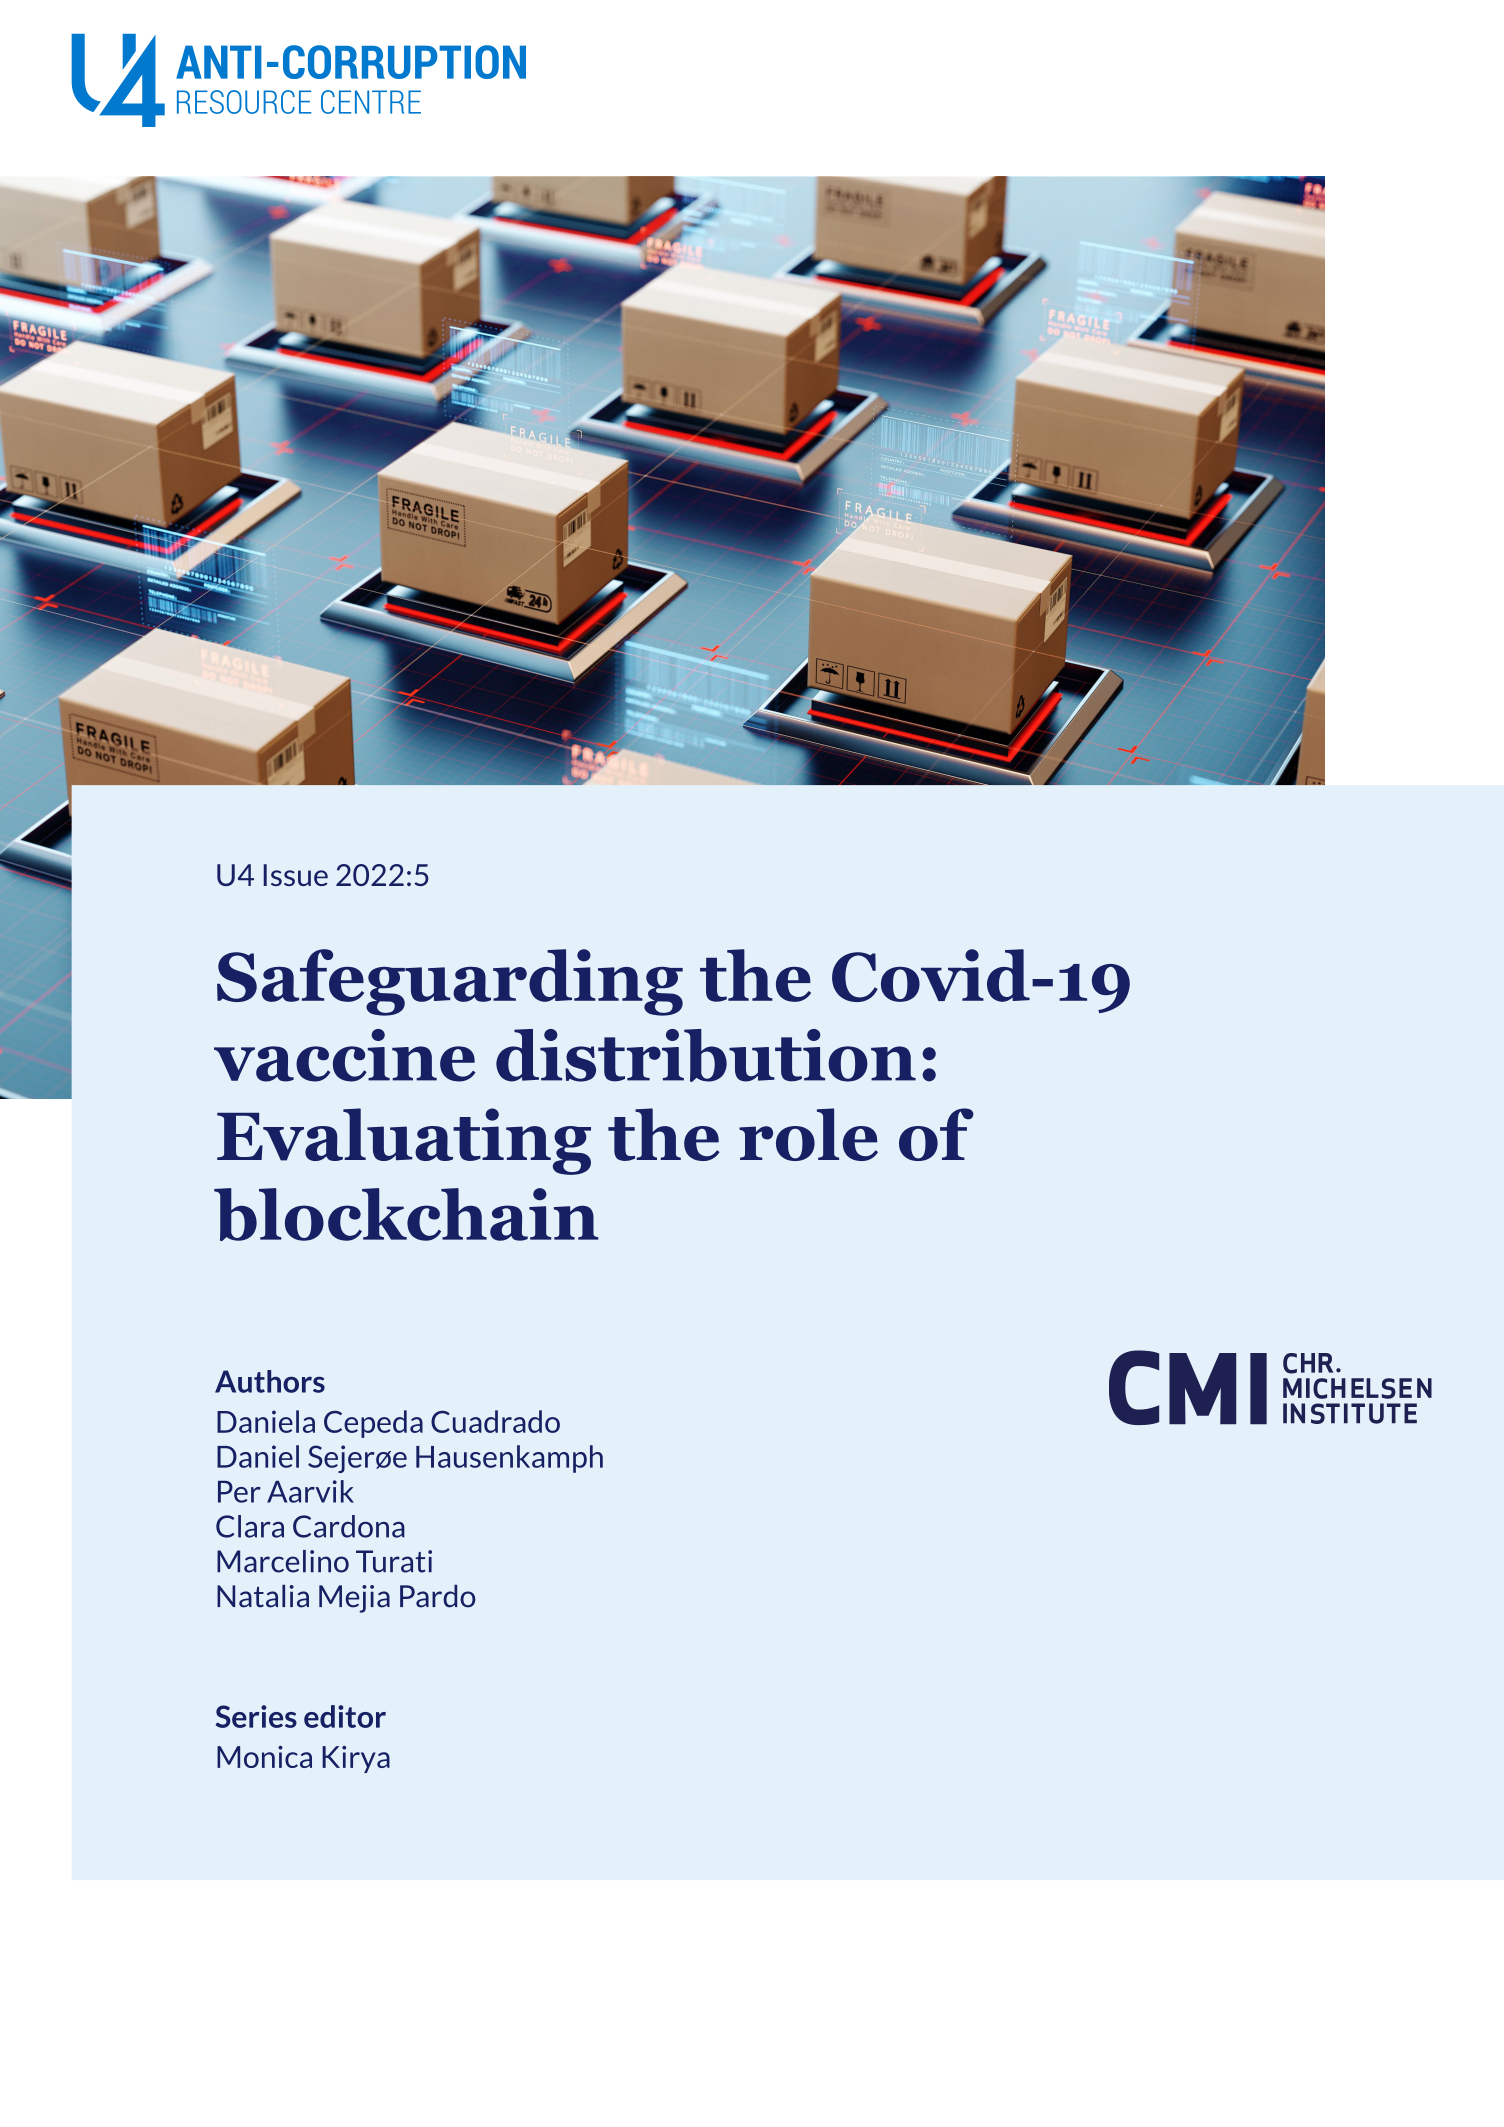 Safeguarding the Covid-19 vaccine distribution: Evaluating the role of blockchain